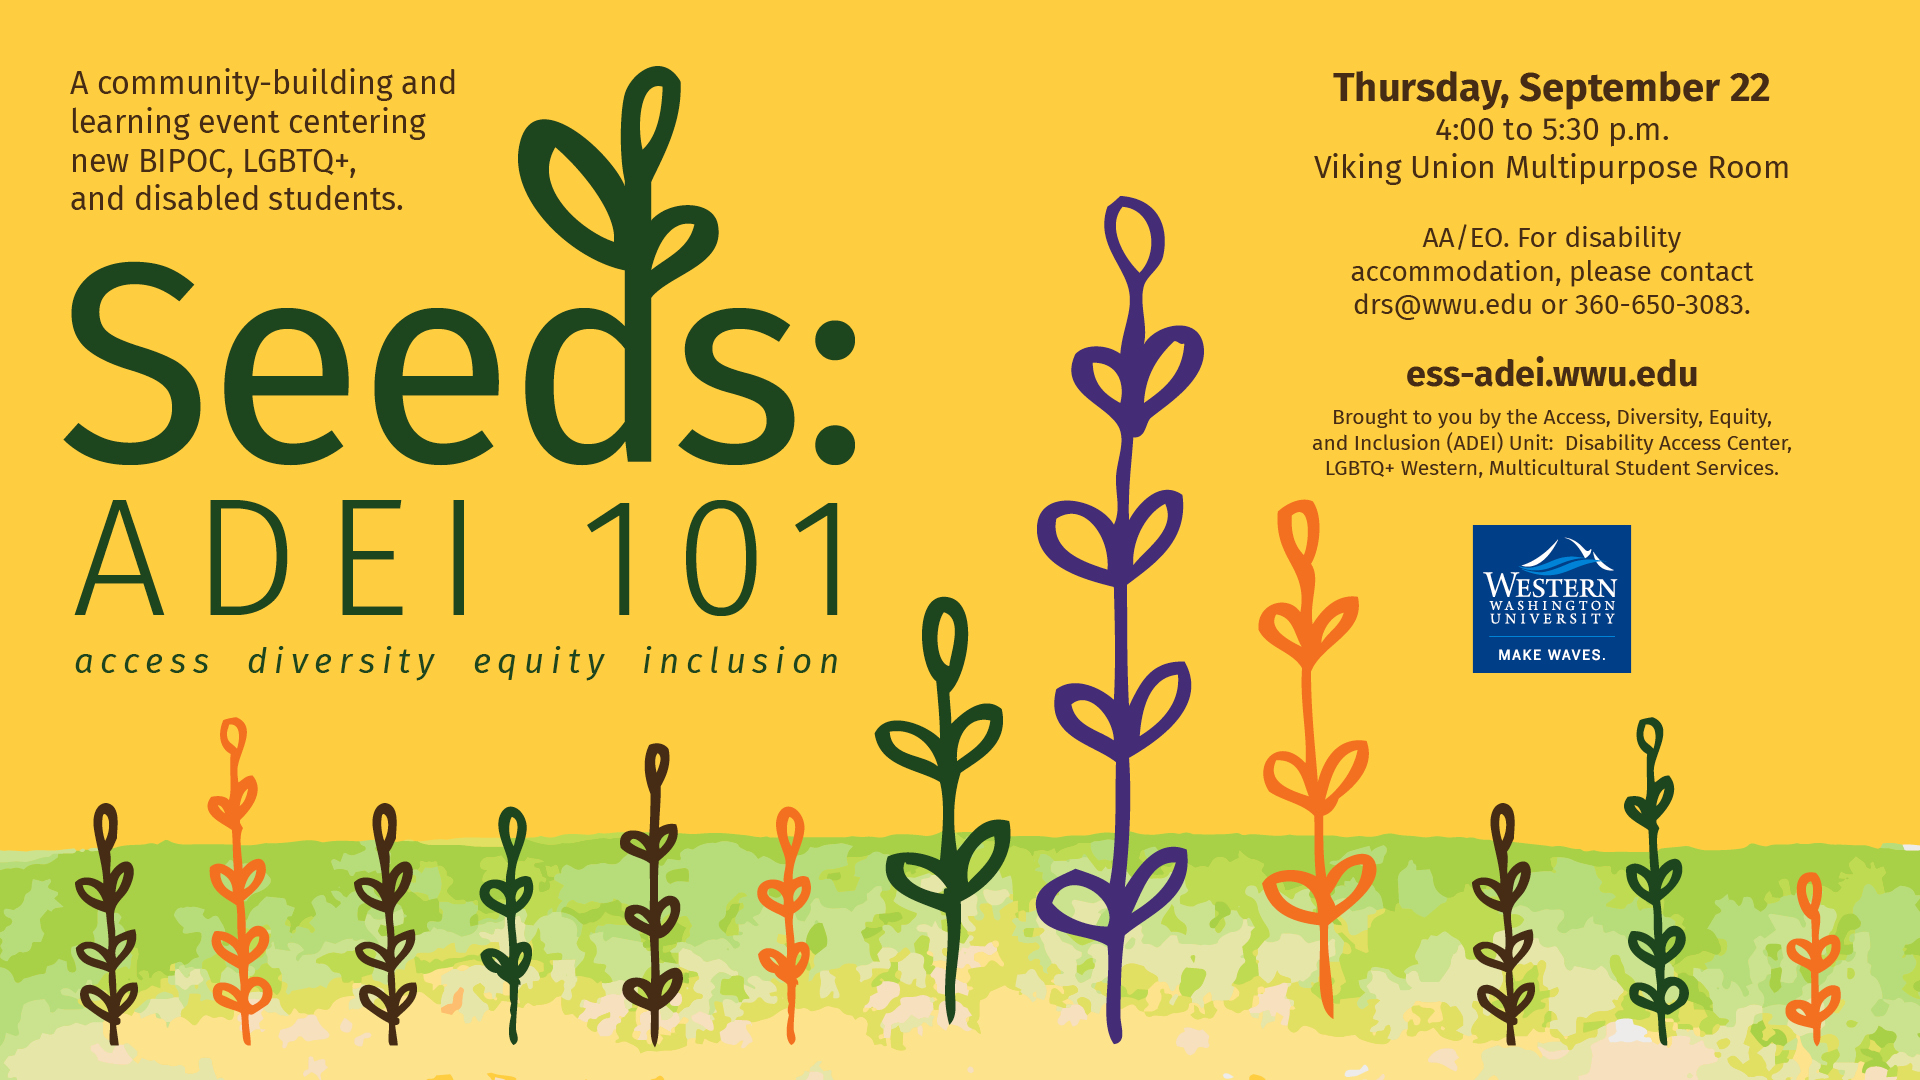 Seeds: ADEI 101  A community-building and learning event centering new BIPOC, LGBTQ+, and disabled students.     Thursday, September 22 from 4:00 to 5:30pm in the Viking Union Multicultural Center     New students, kick your time at Western off right by learning about programs and services that center BIPOC, LGBTQ+, and disabled students. Grow your understanding of ways to care for yourself and build inclusive intercultural communities in your classes, residence halls, clubs, and beyond. 